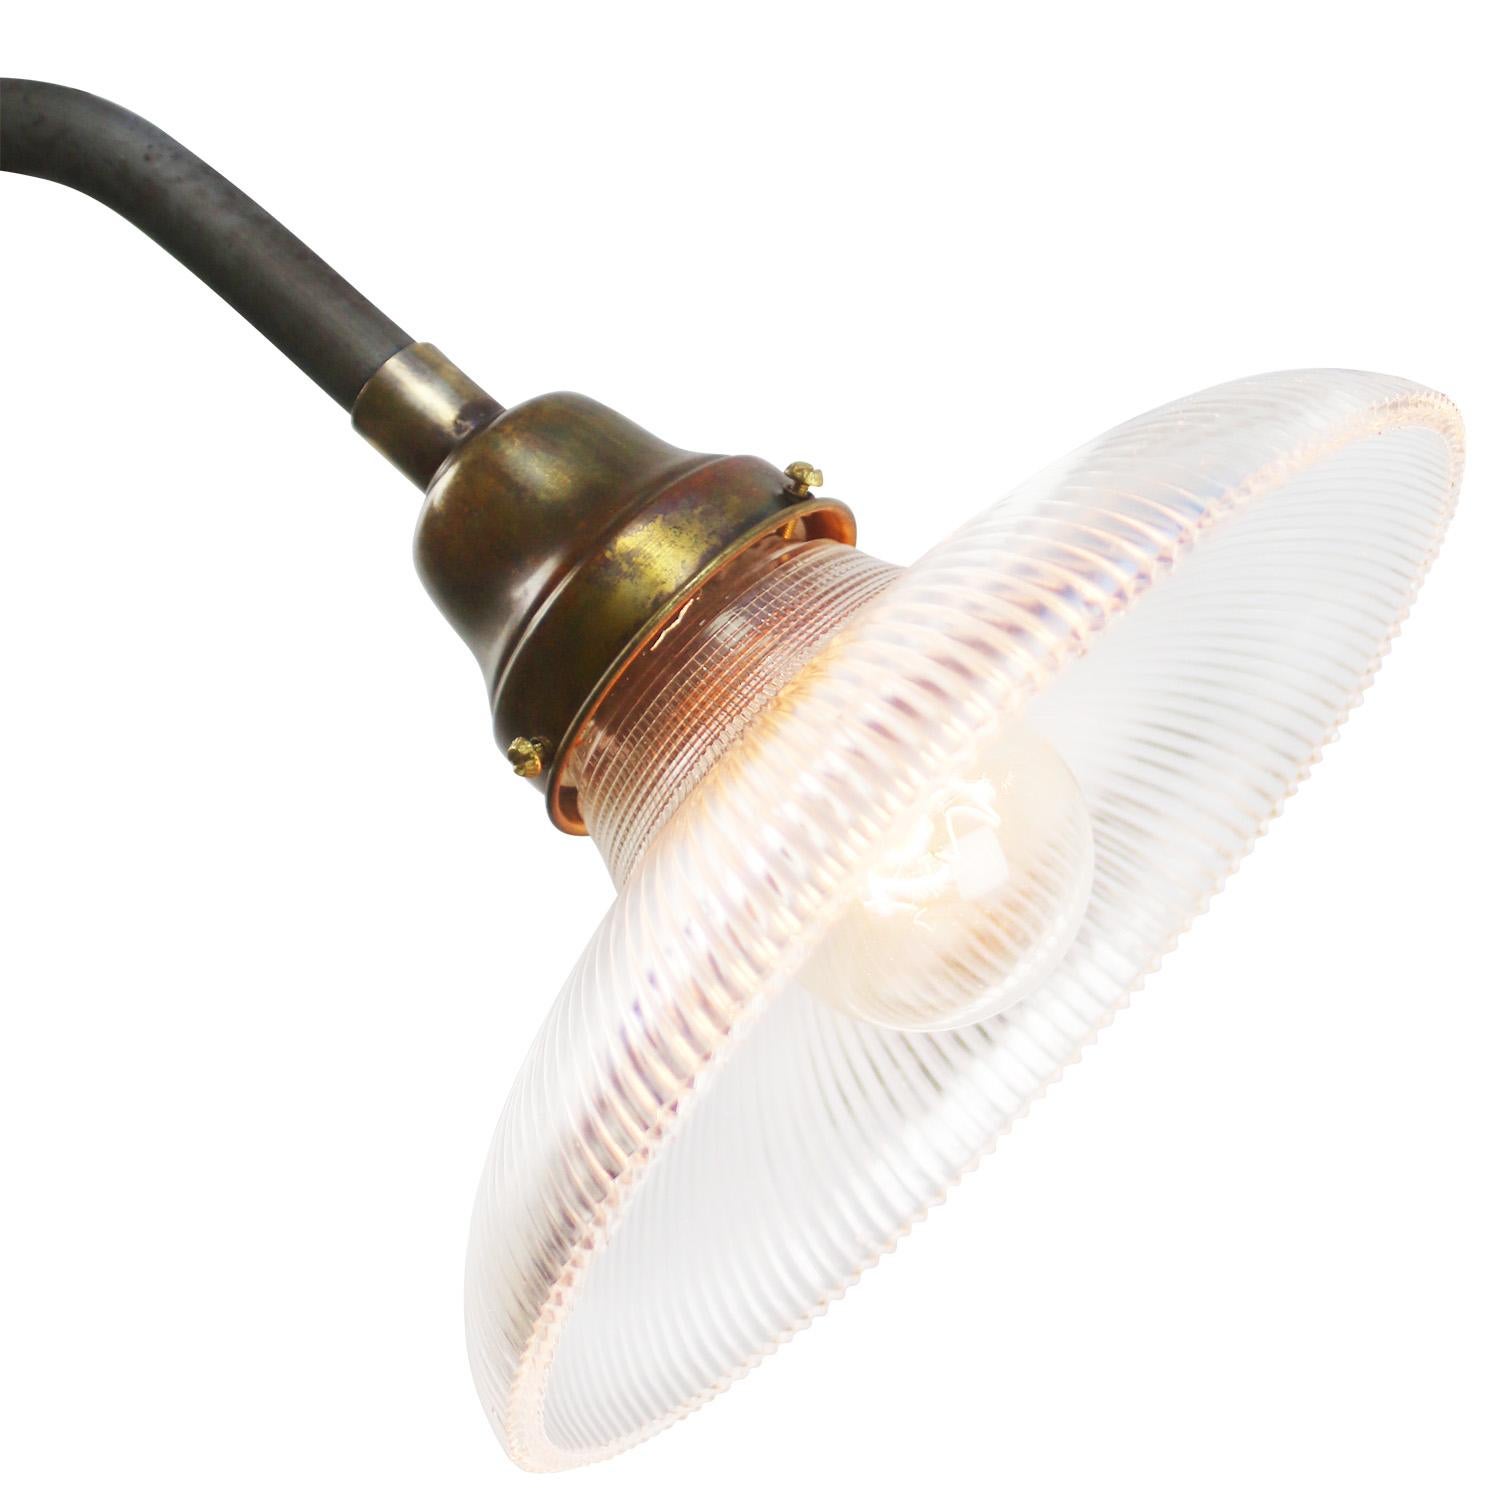 Holophane glass cast iron industrial scone wall light.
Cast iron with brass top, clear striped glass.

Diameter cast iron wall mount: 10.5 cm / 4”
2 holes to secure.

Weight: 2.00 kg / 4.4 lb

Priced per individual item. All lamps have been made